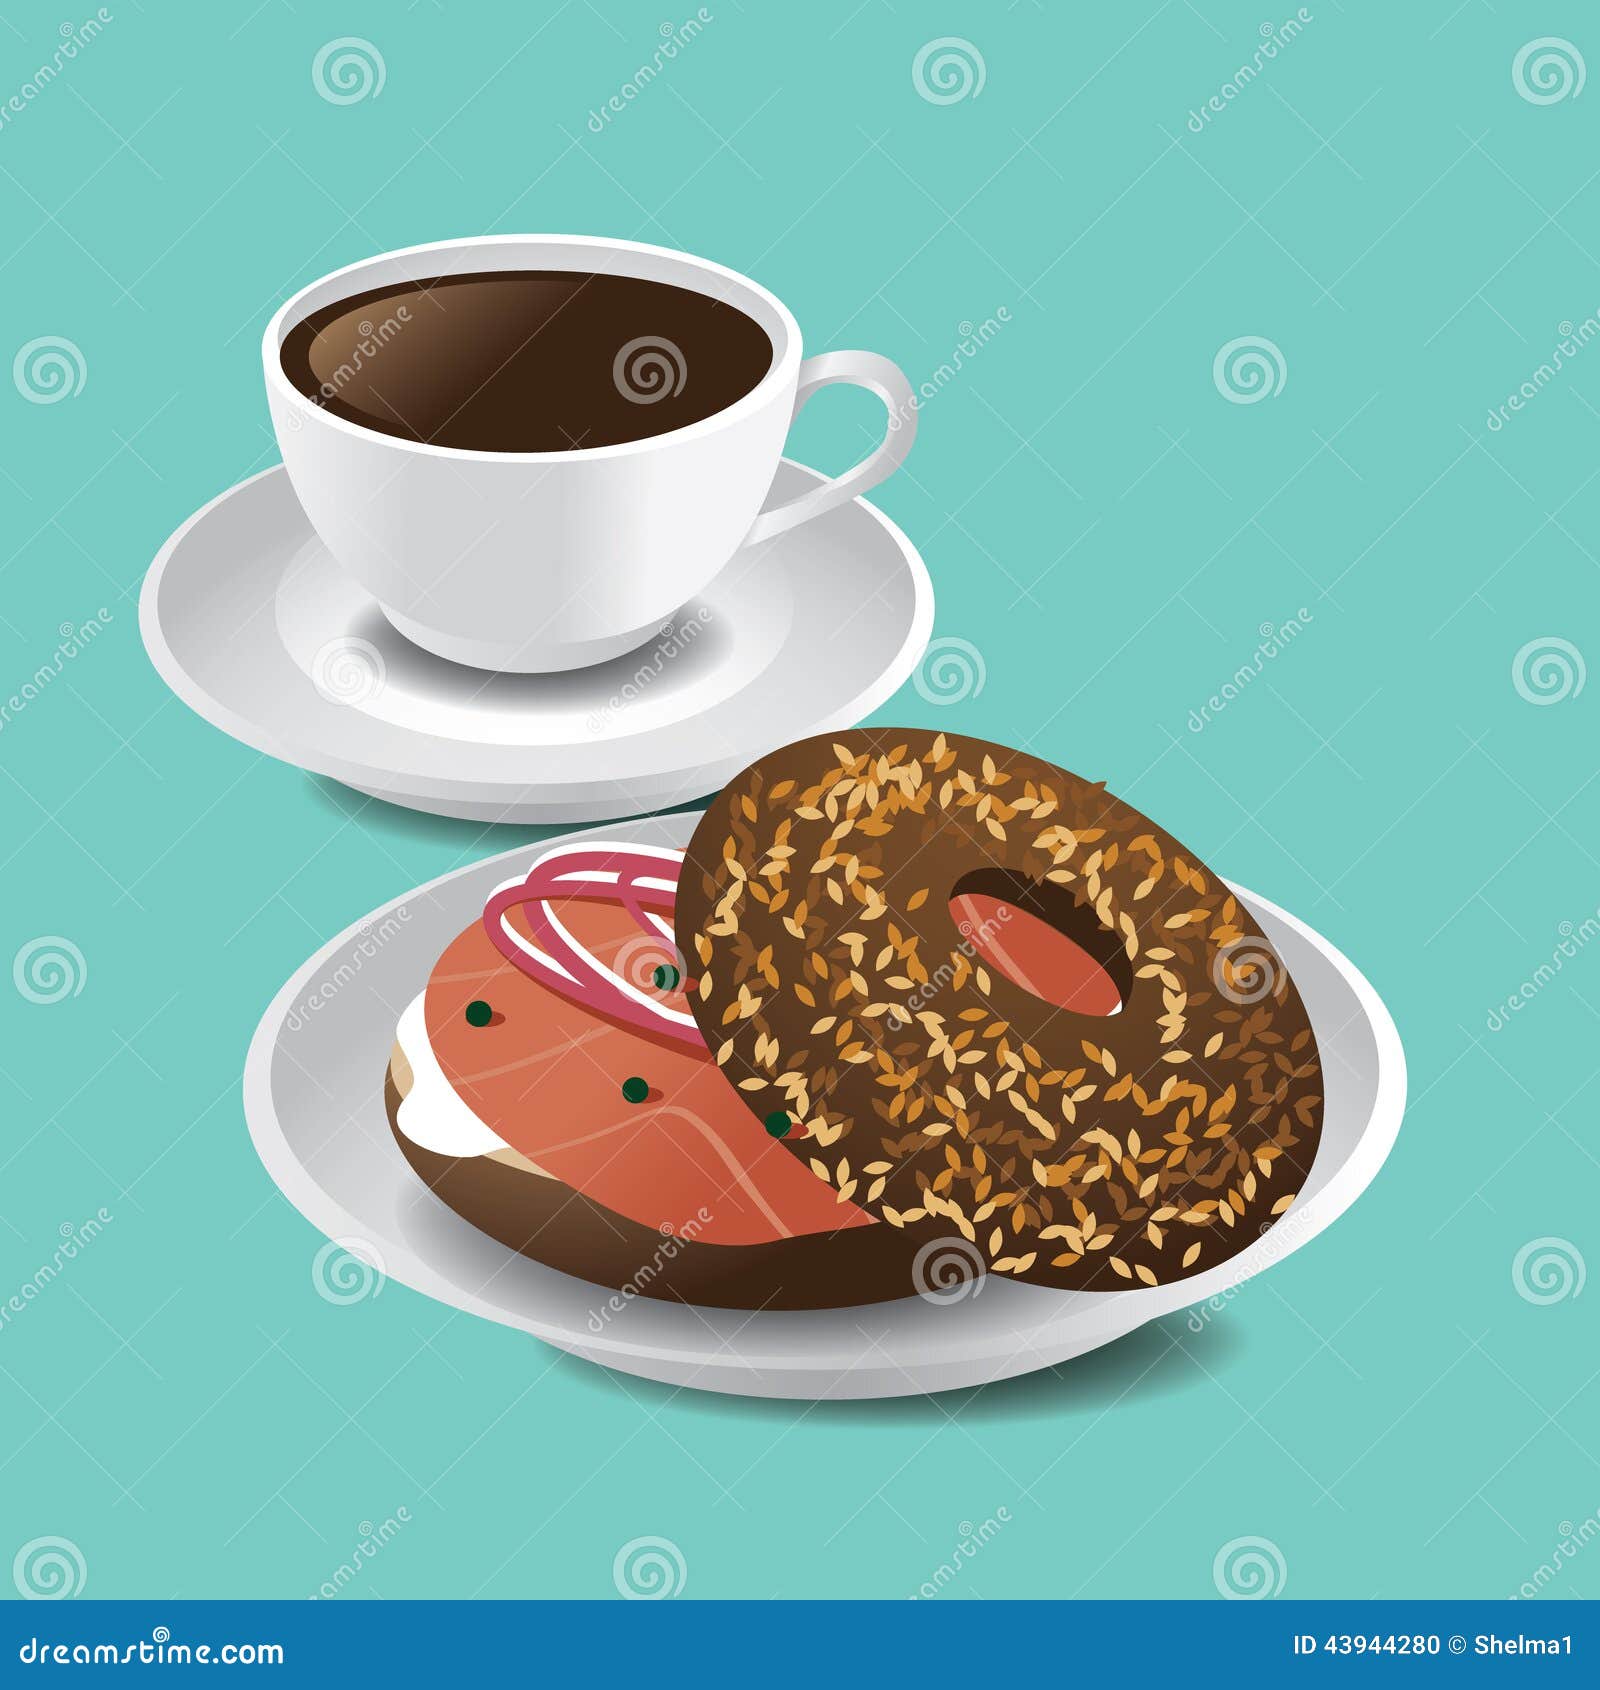 Bagel with lox stock vector. Image of snack, lunch, bread ...